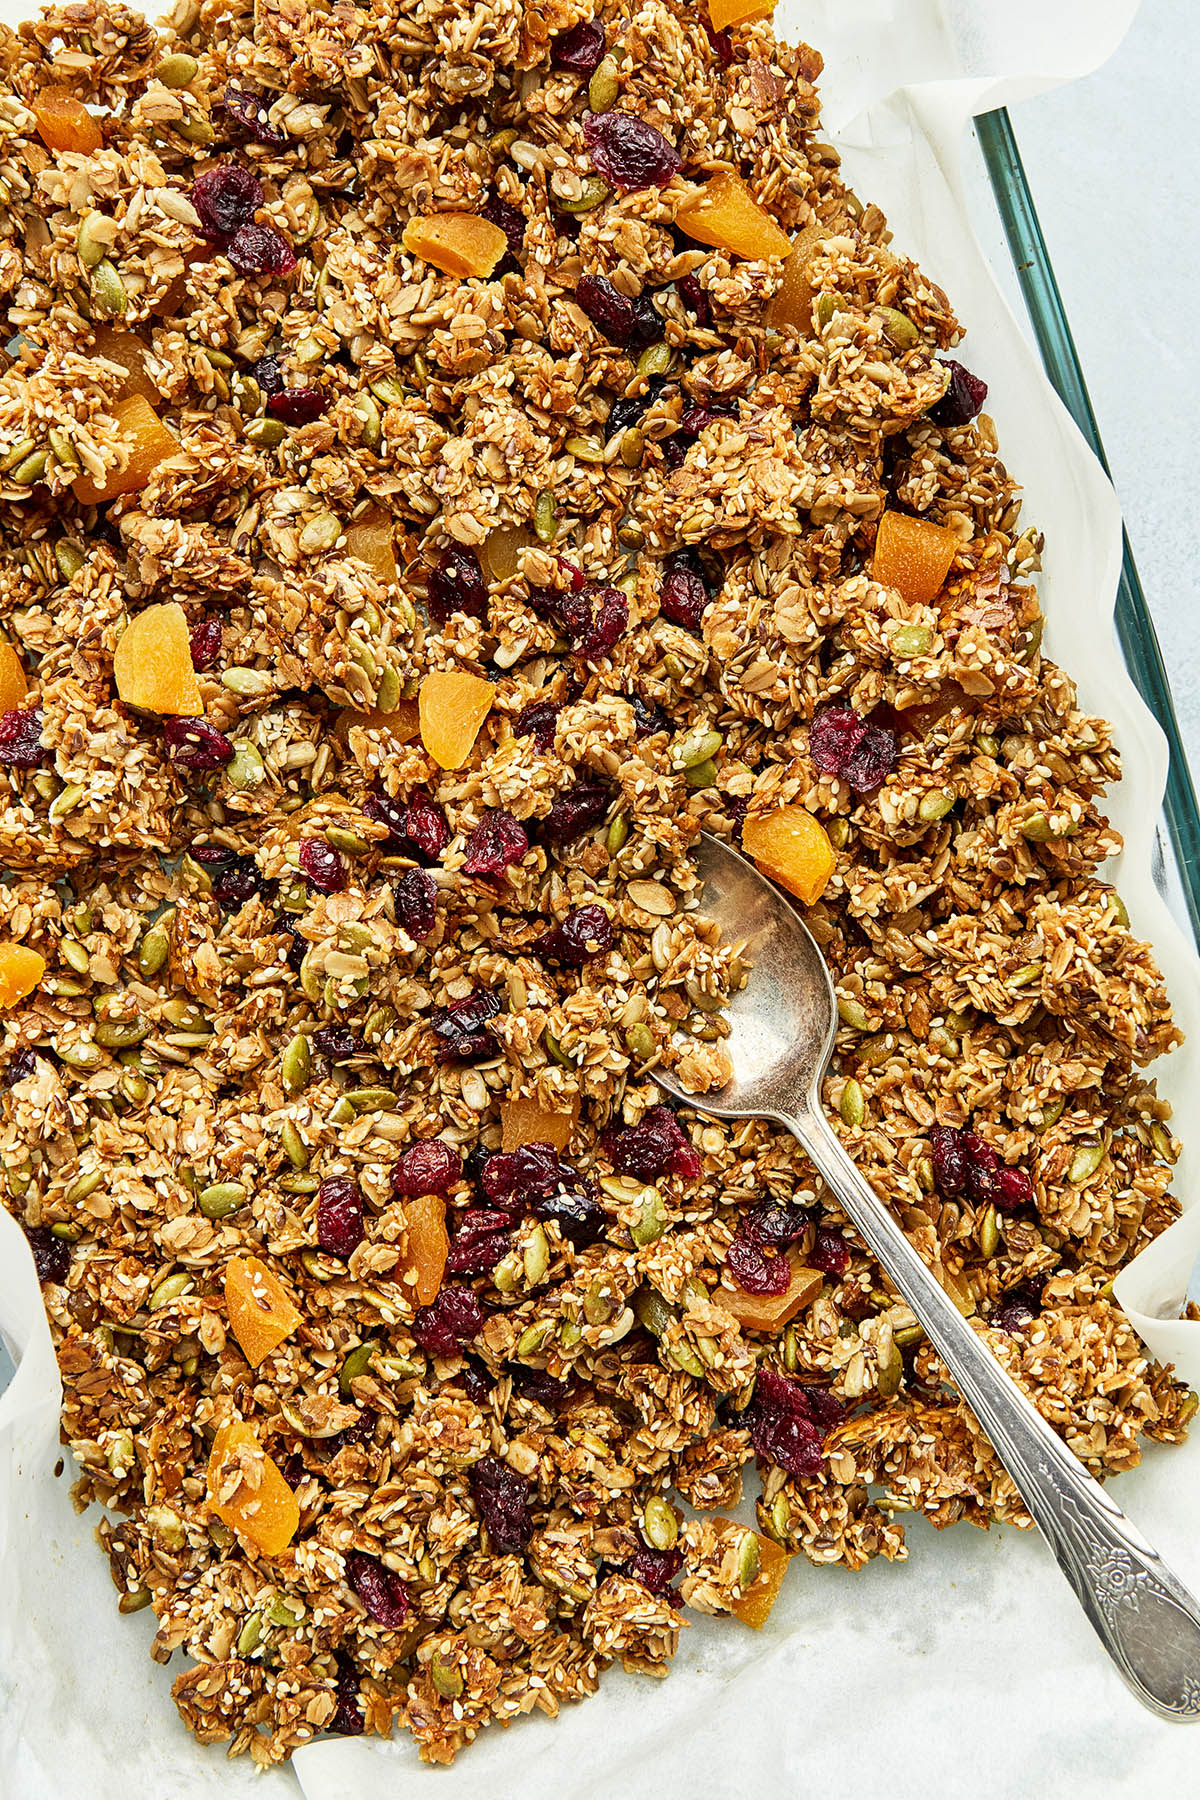 A batch of nut free granola and a baking dish lined with parchment paper with a spoon inside the dish.